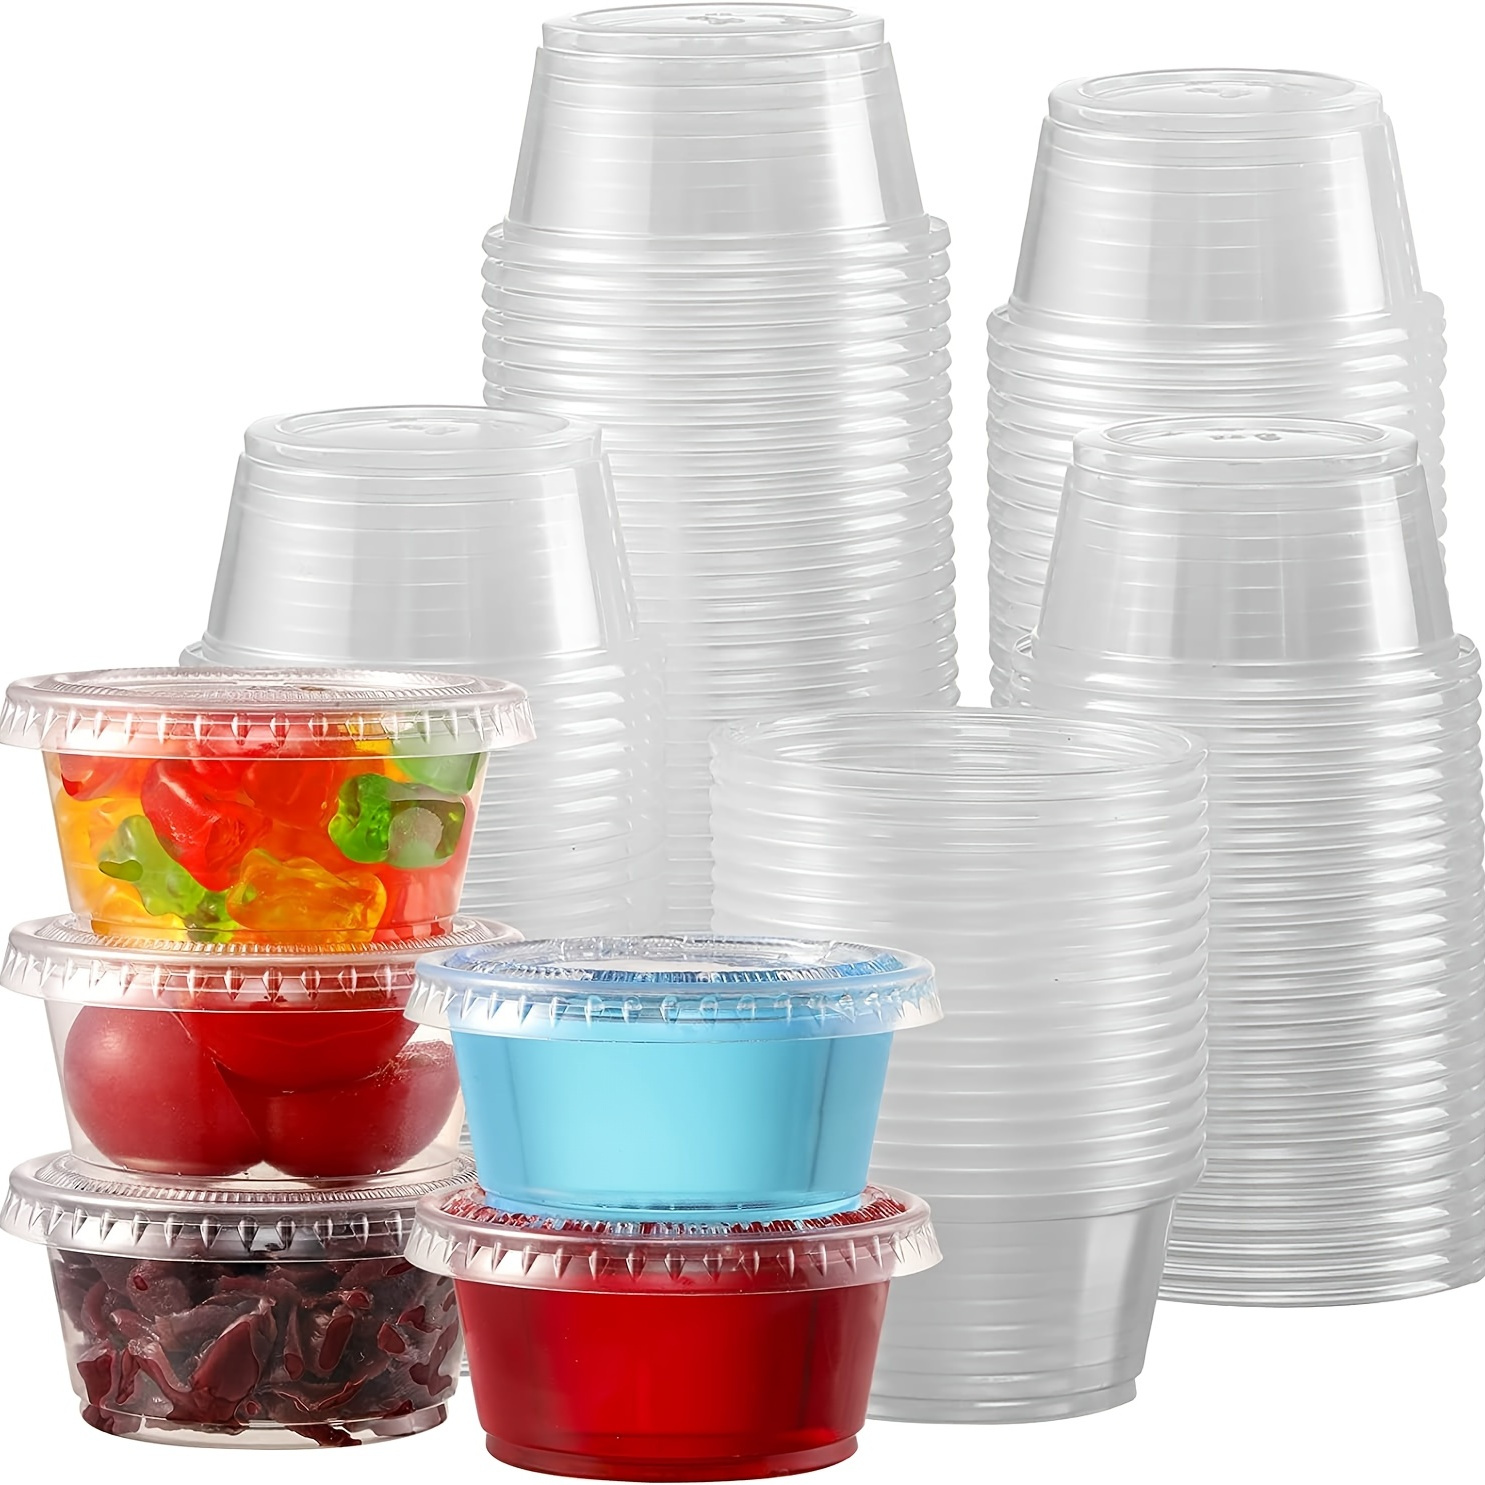 100 Ct 4 Oz Clear Plastic Portion Cups, Jello Shot Condiment Sauce Dip  Party Mixing Sampling, BPA Free Made in USA, Reusable & Disposable 